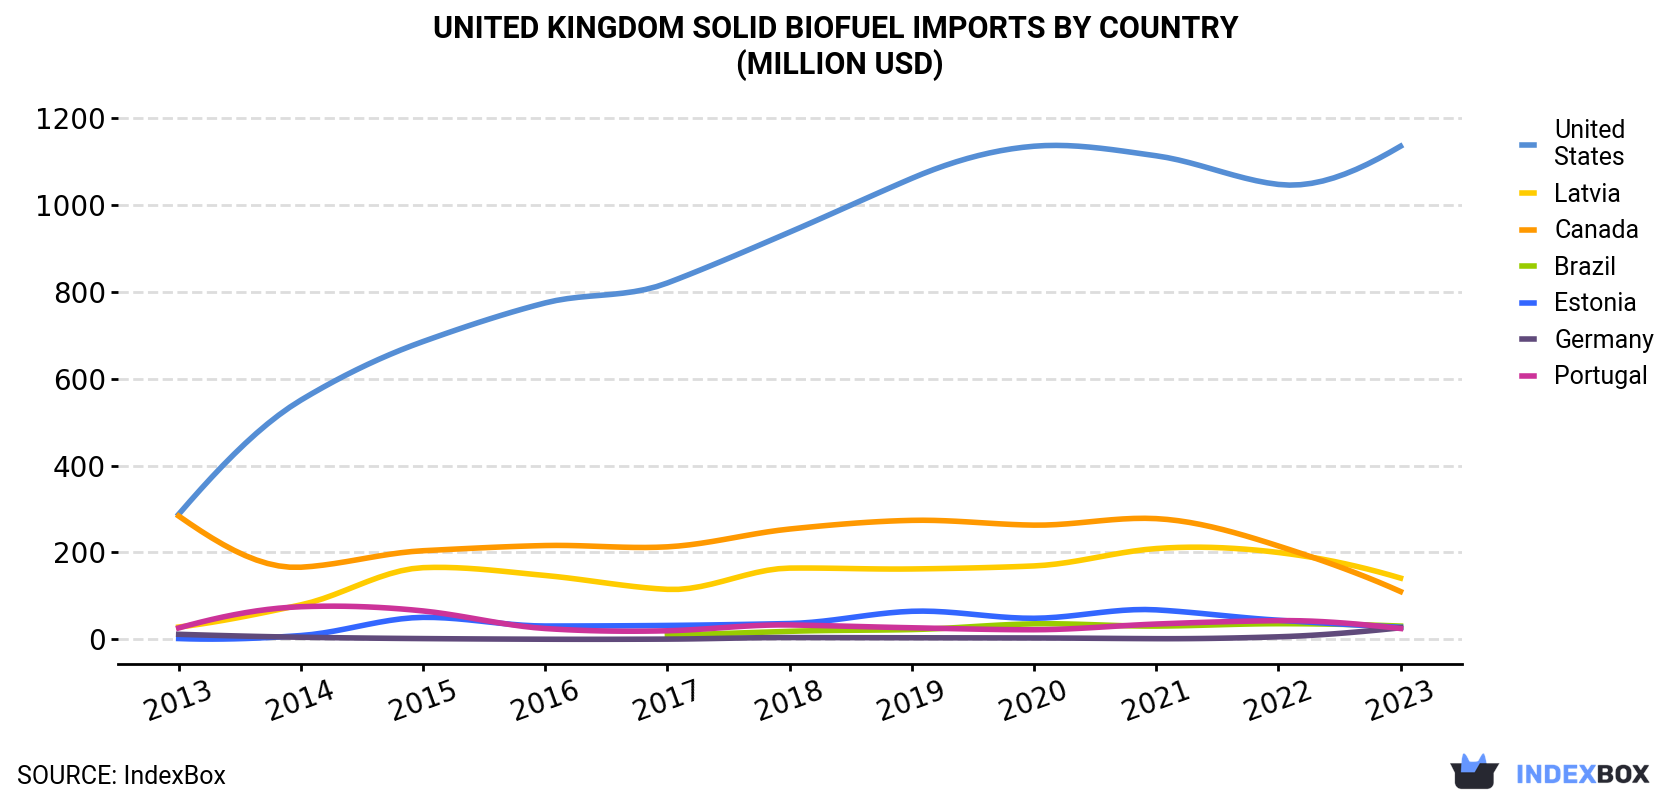 United Kingdom Solid Biofuel Imports By Country (Million USD)